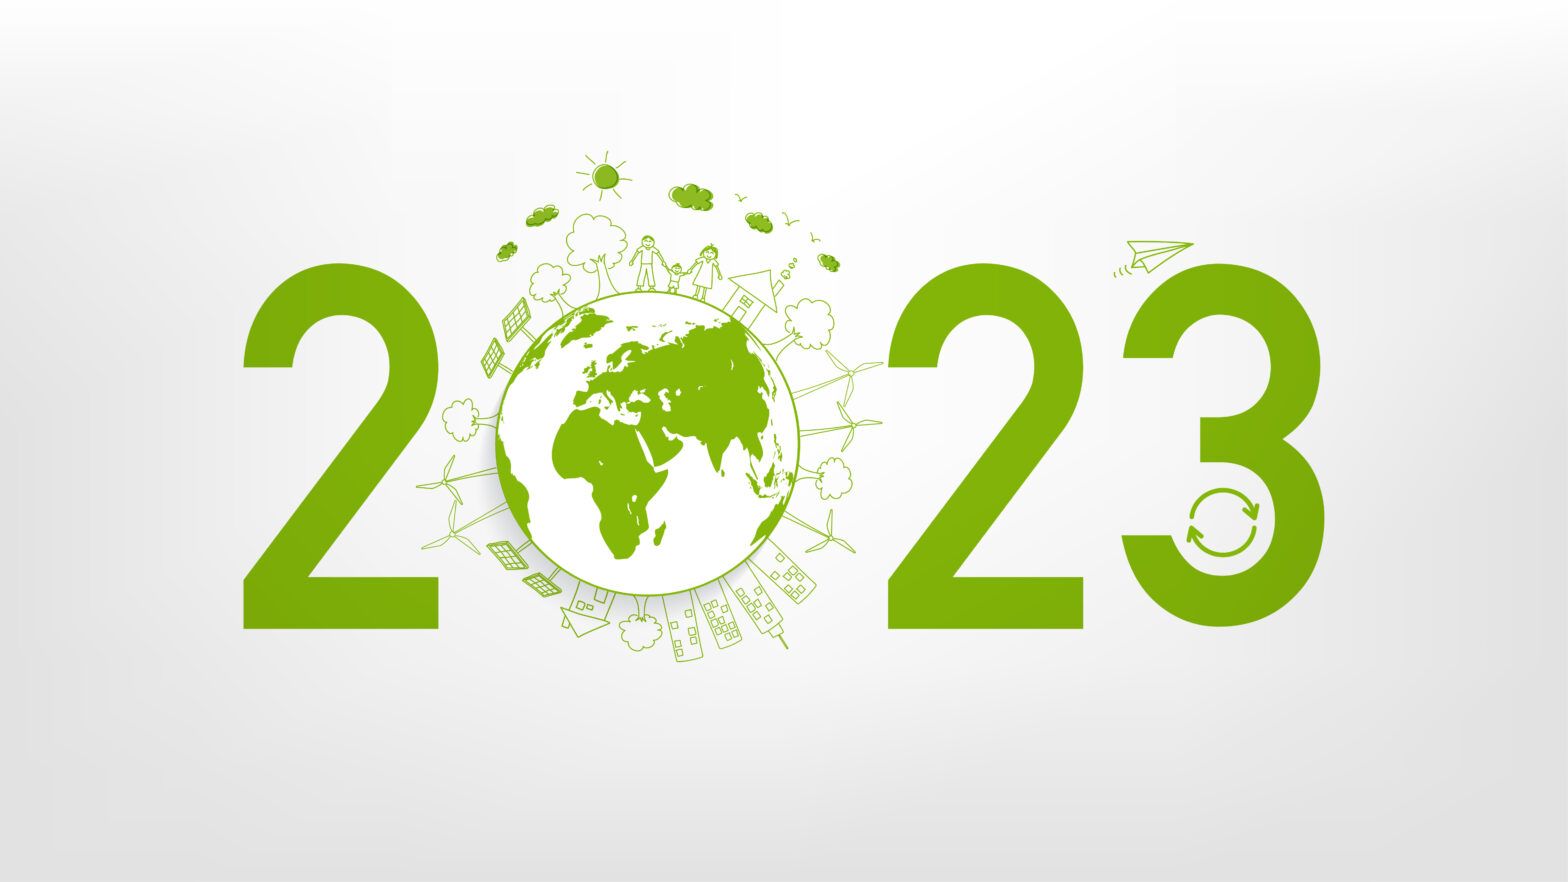 New year 2023 Eco friendly, Sustainability planning concept and World environmental with doodle icons